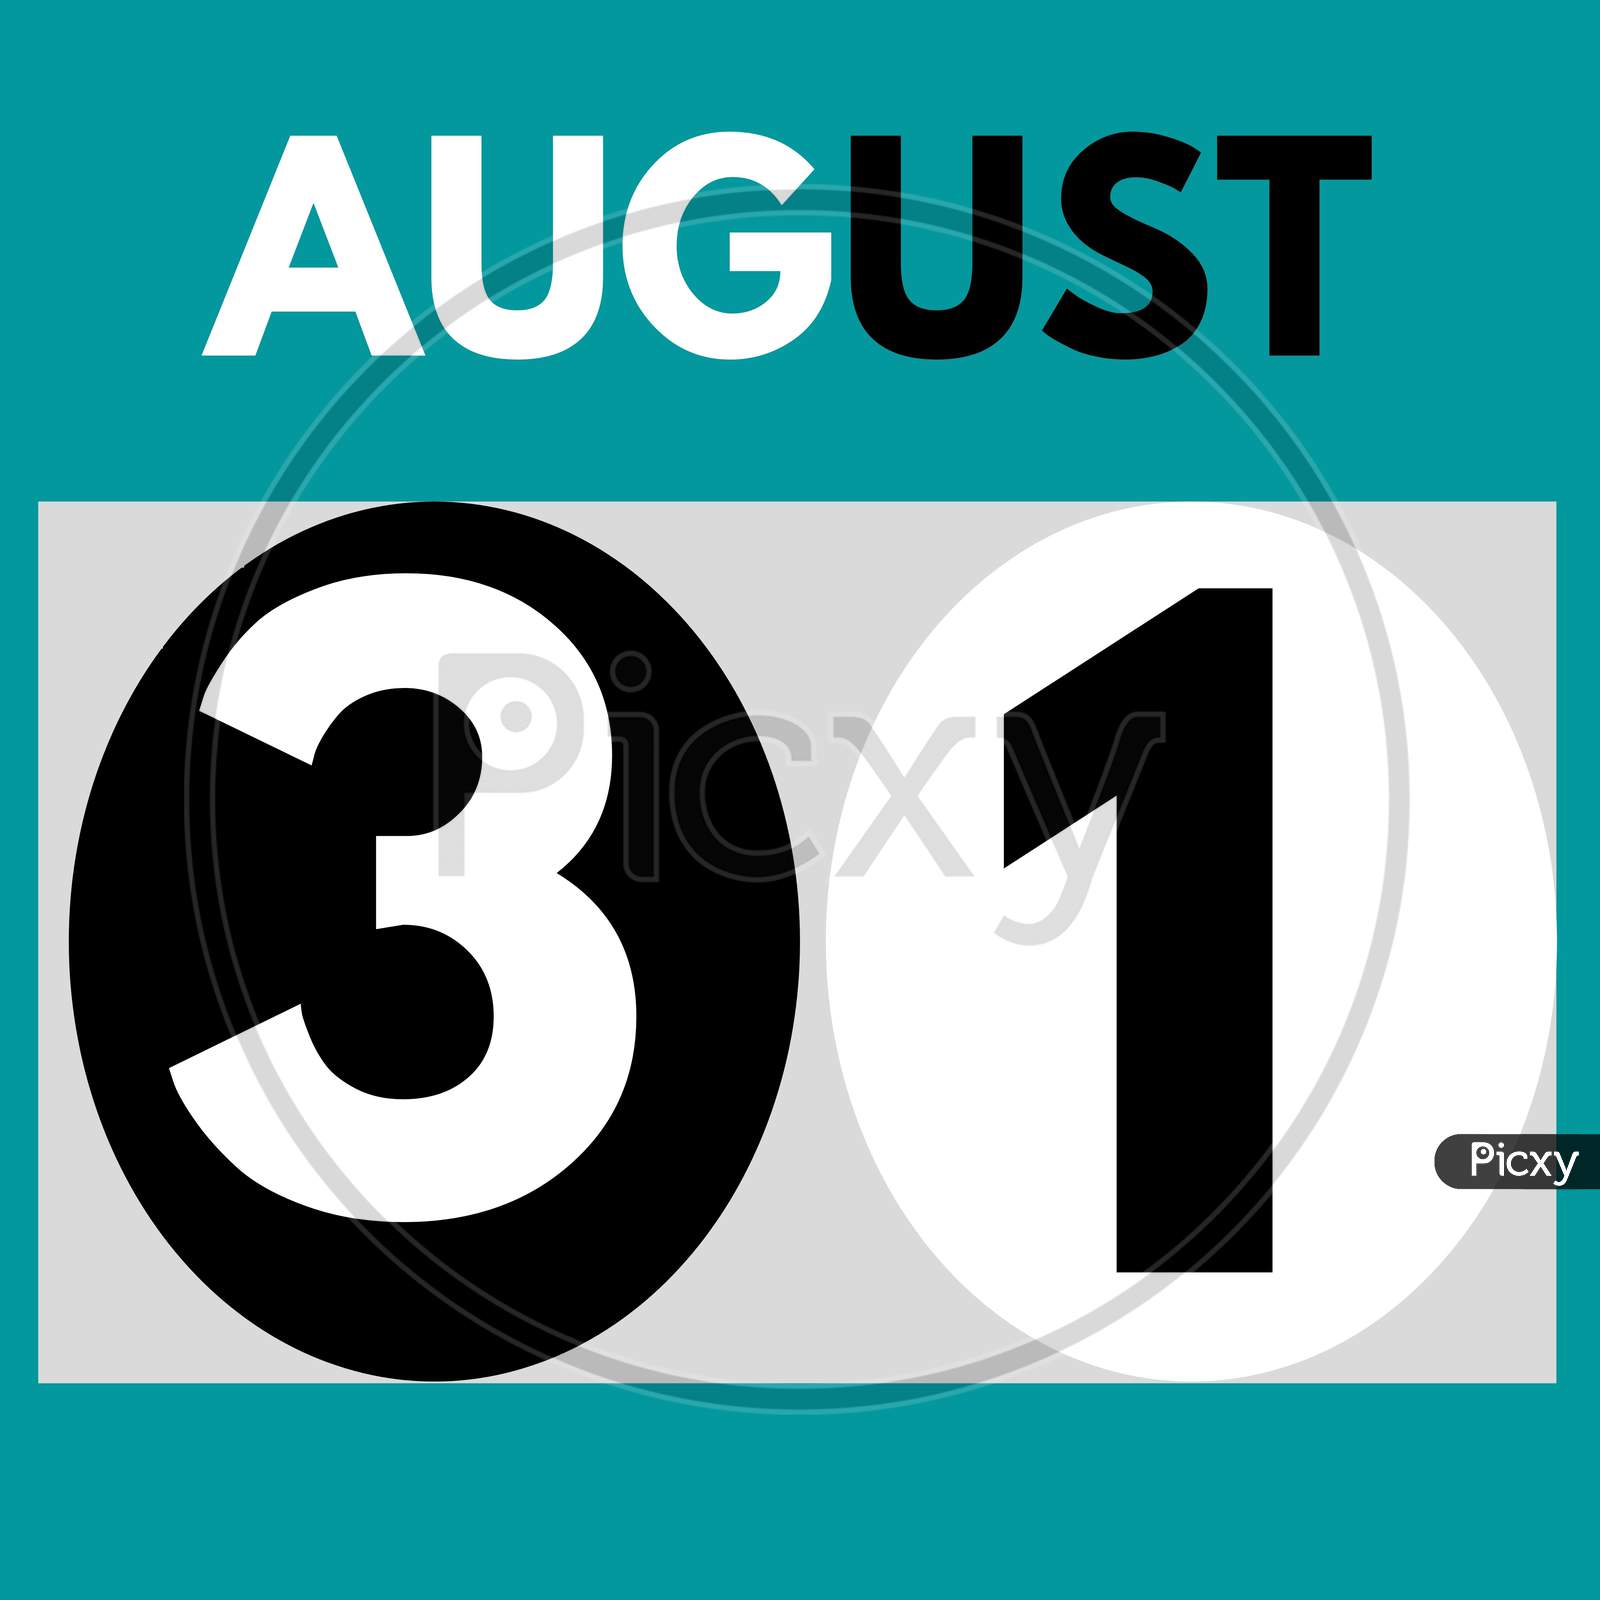 August 31. Modern Daily Calendar Icon .Date ,Day, Month .Calendar For The Month Of August